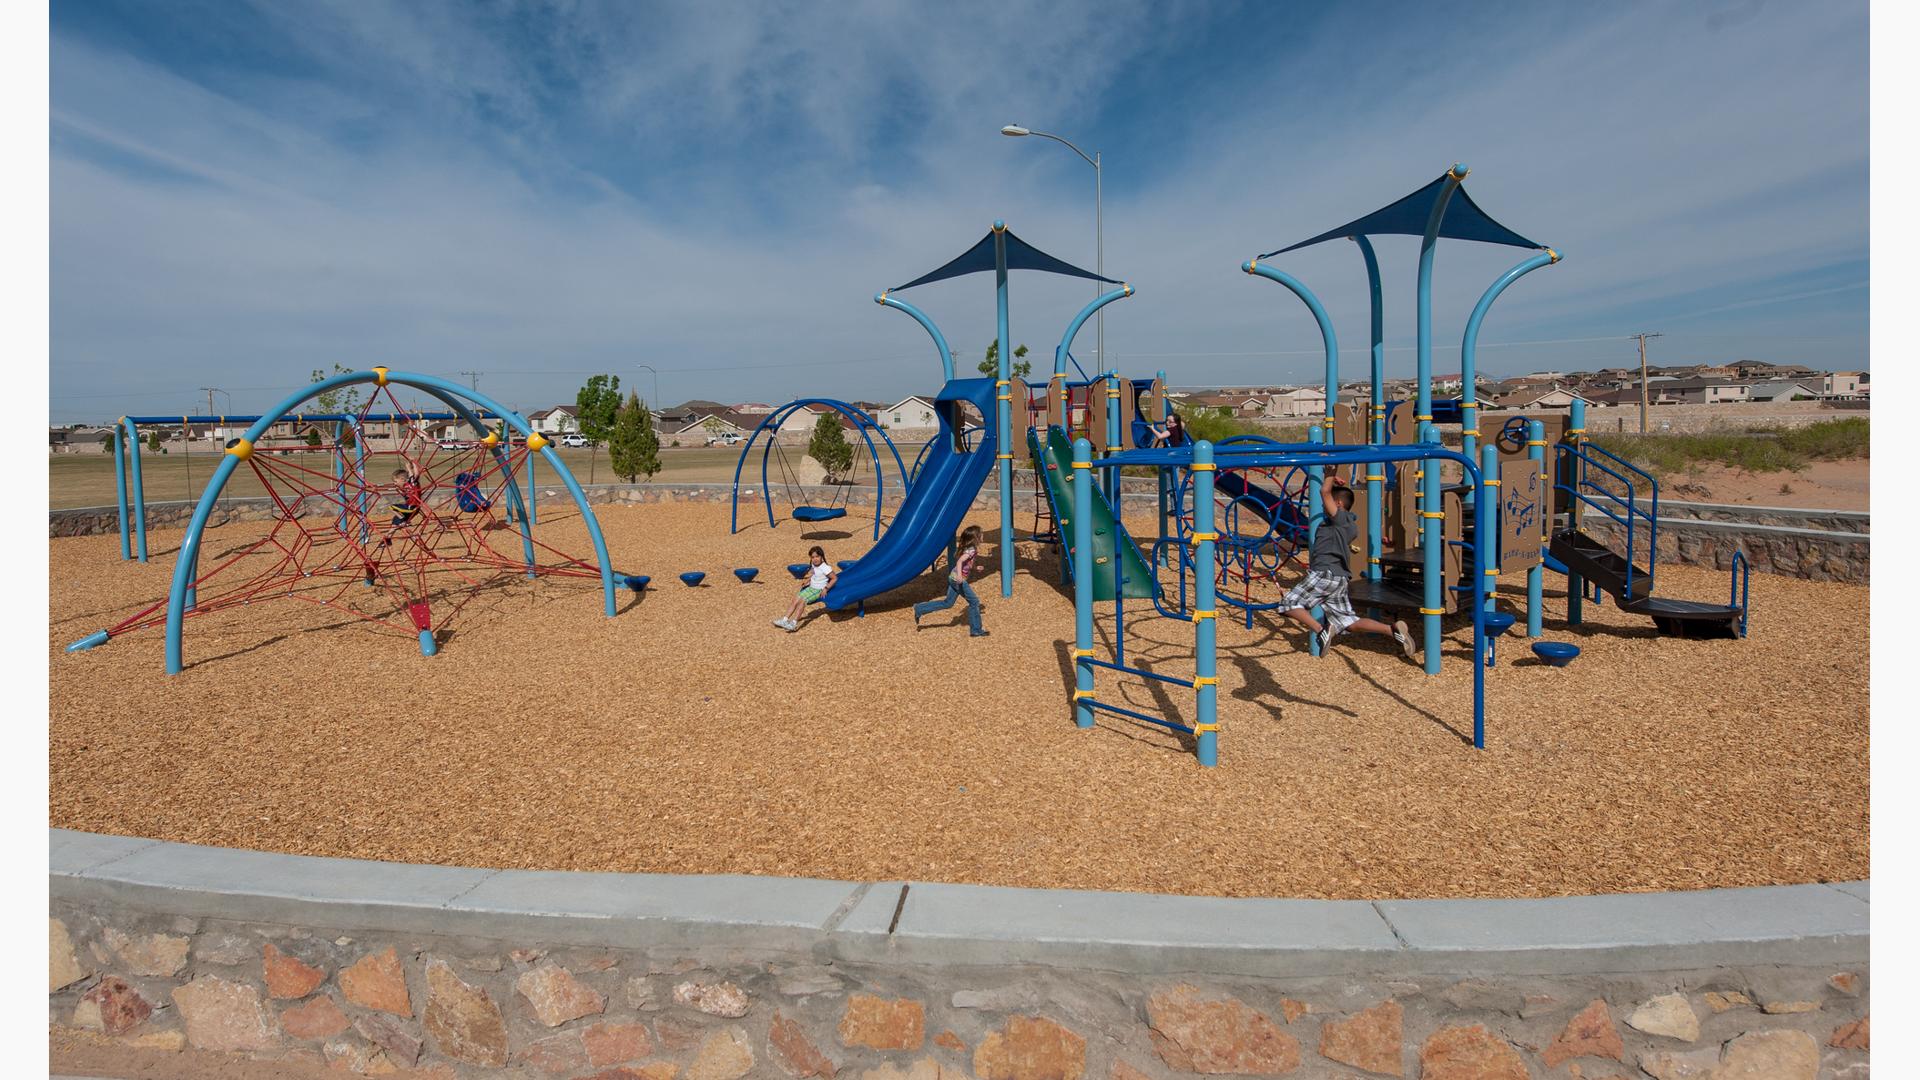 Children play on a park playground with different shades of blue posts, overhead shades, and climbers all surrounded by a neighborhood community. 